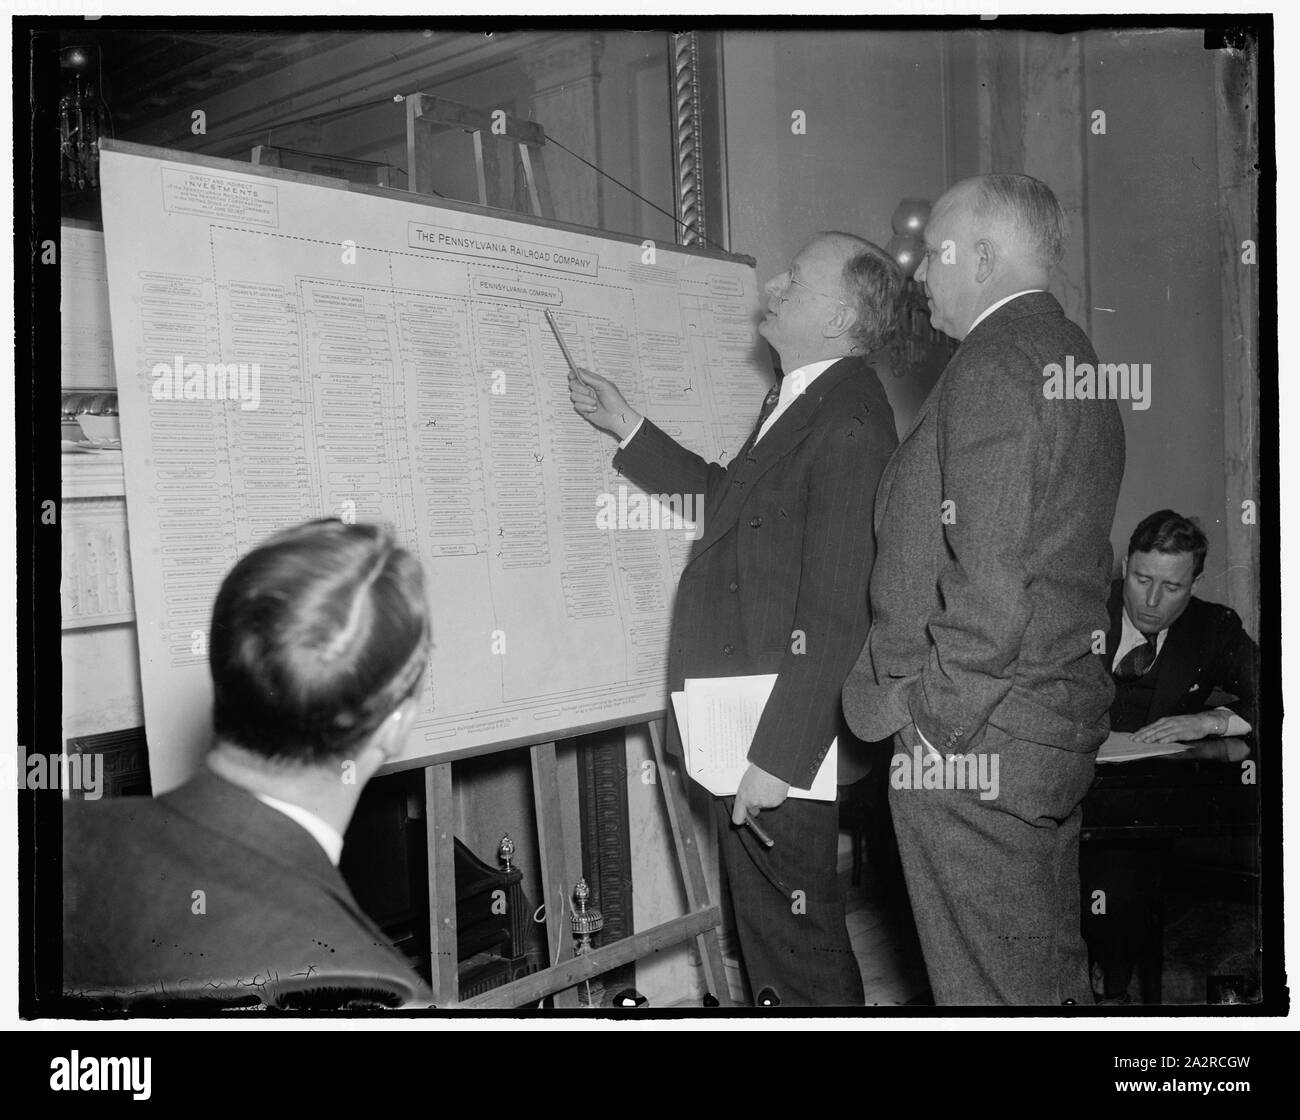 Rail Inquiry Chairman and Pennsy head view chart of Penna. R.R. holding companies. Washington, D.C., Dec. 15. A huge chart showing the numerous subsidiaries controlled by the Pennsylvania Railroad was on display at the Senate Rail Inquiry Committee room today. Chairman of the committee, Senator Burton K. Wheeler (left) is shown viewing the chart as he questions Martin W. Clement, President of the Pennsy, about the salaries paid directors of the road. Clement told the committee that his own salary had been increased from $60,000 to $100,000 on January 1, 1937, 12/15/37 Stock Photo